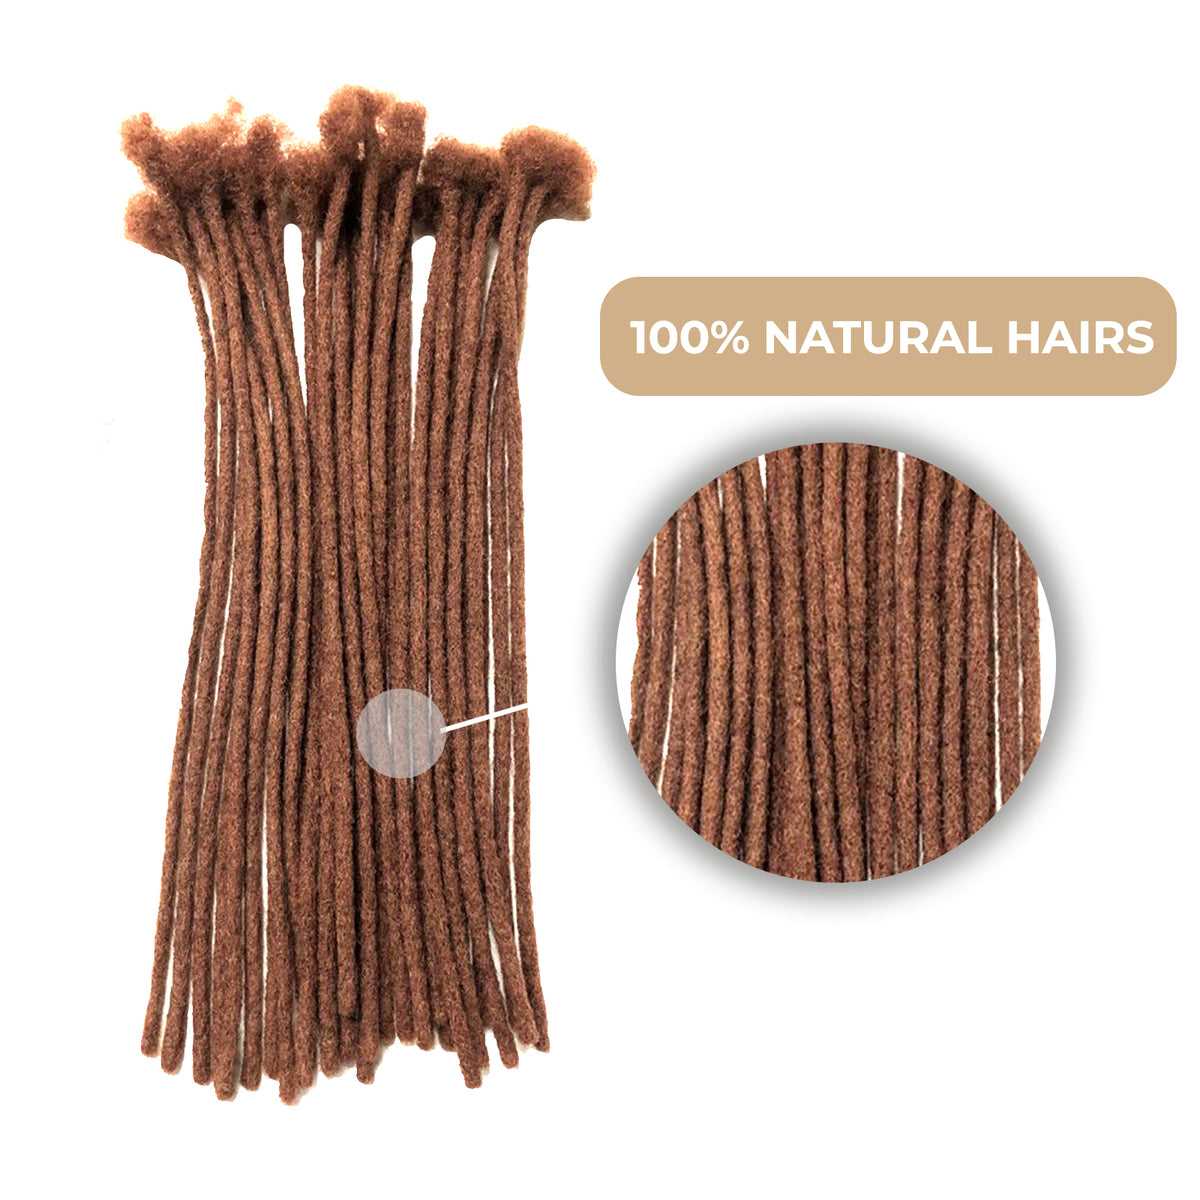 100% Human Hair Dreadlock Extensions 16Inch 10 Strands Handmade Natural Loc Extensions Human Hair Bundle Dreads Extensions For Woman & Men Can Be Dyed/Bleached (Brown/33, 16inch length 0.8 cm Width)